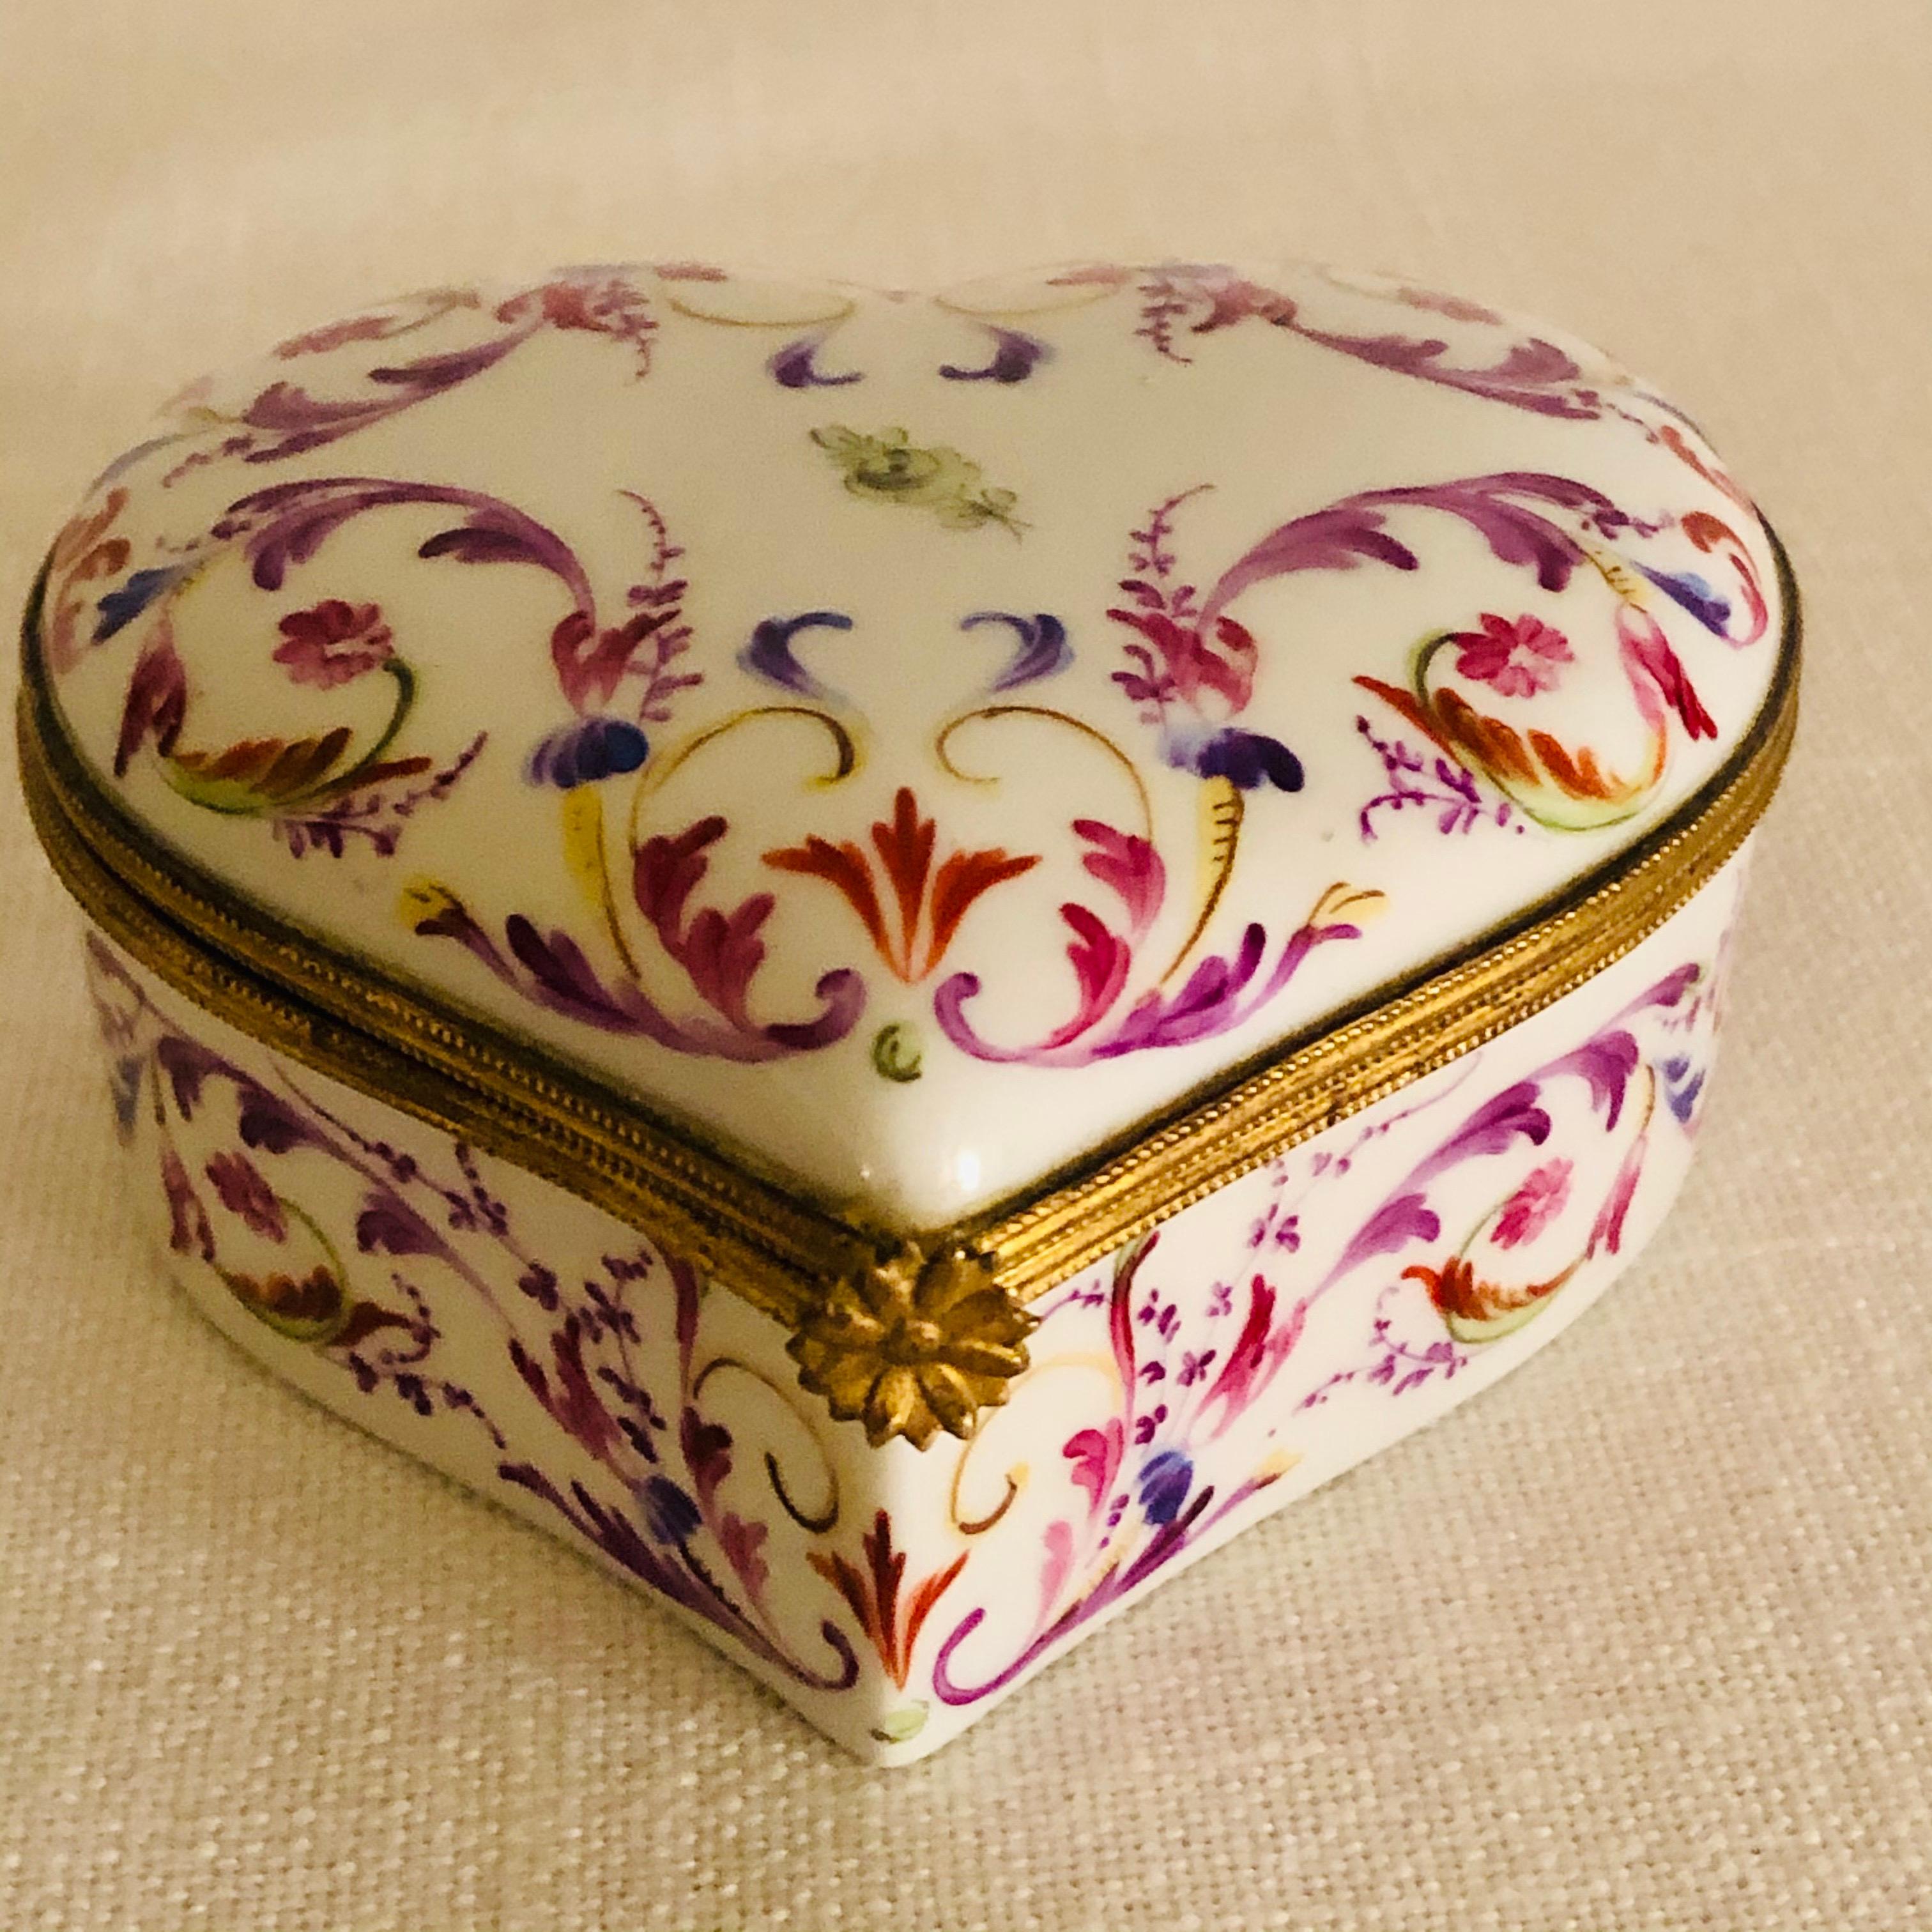 I want to offer you this charming Le Tallec porcelain heart shaped box. It is painted with flowers and an arabesque colorful decoration. The colors of this box are so eye catching with its purple, pink, green and orange intricate painted design. It